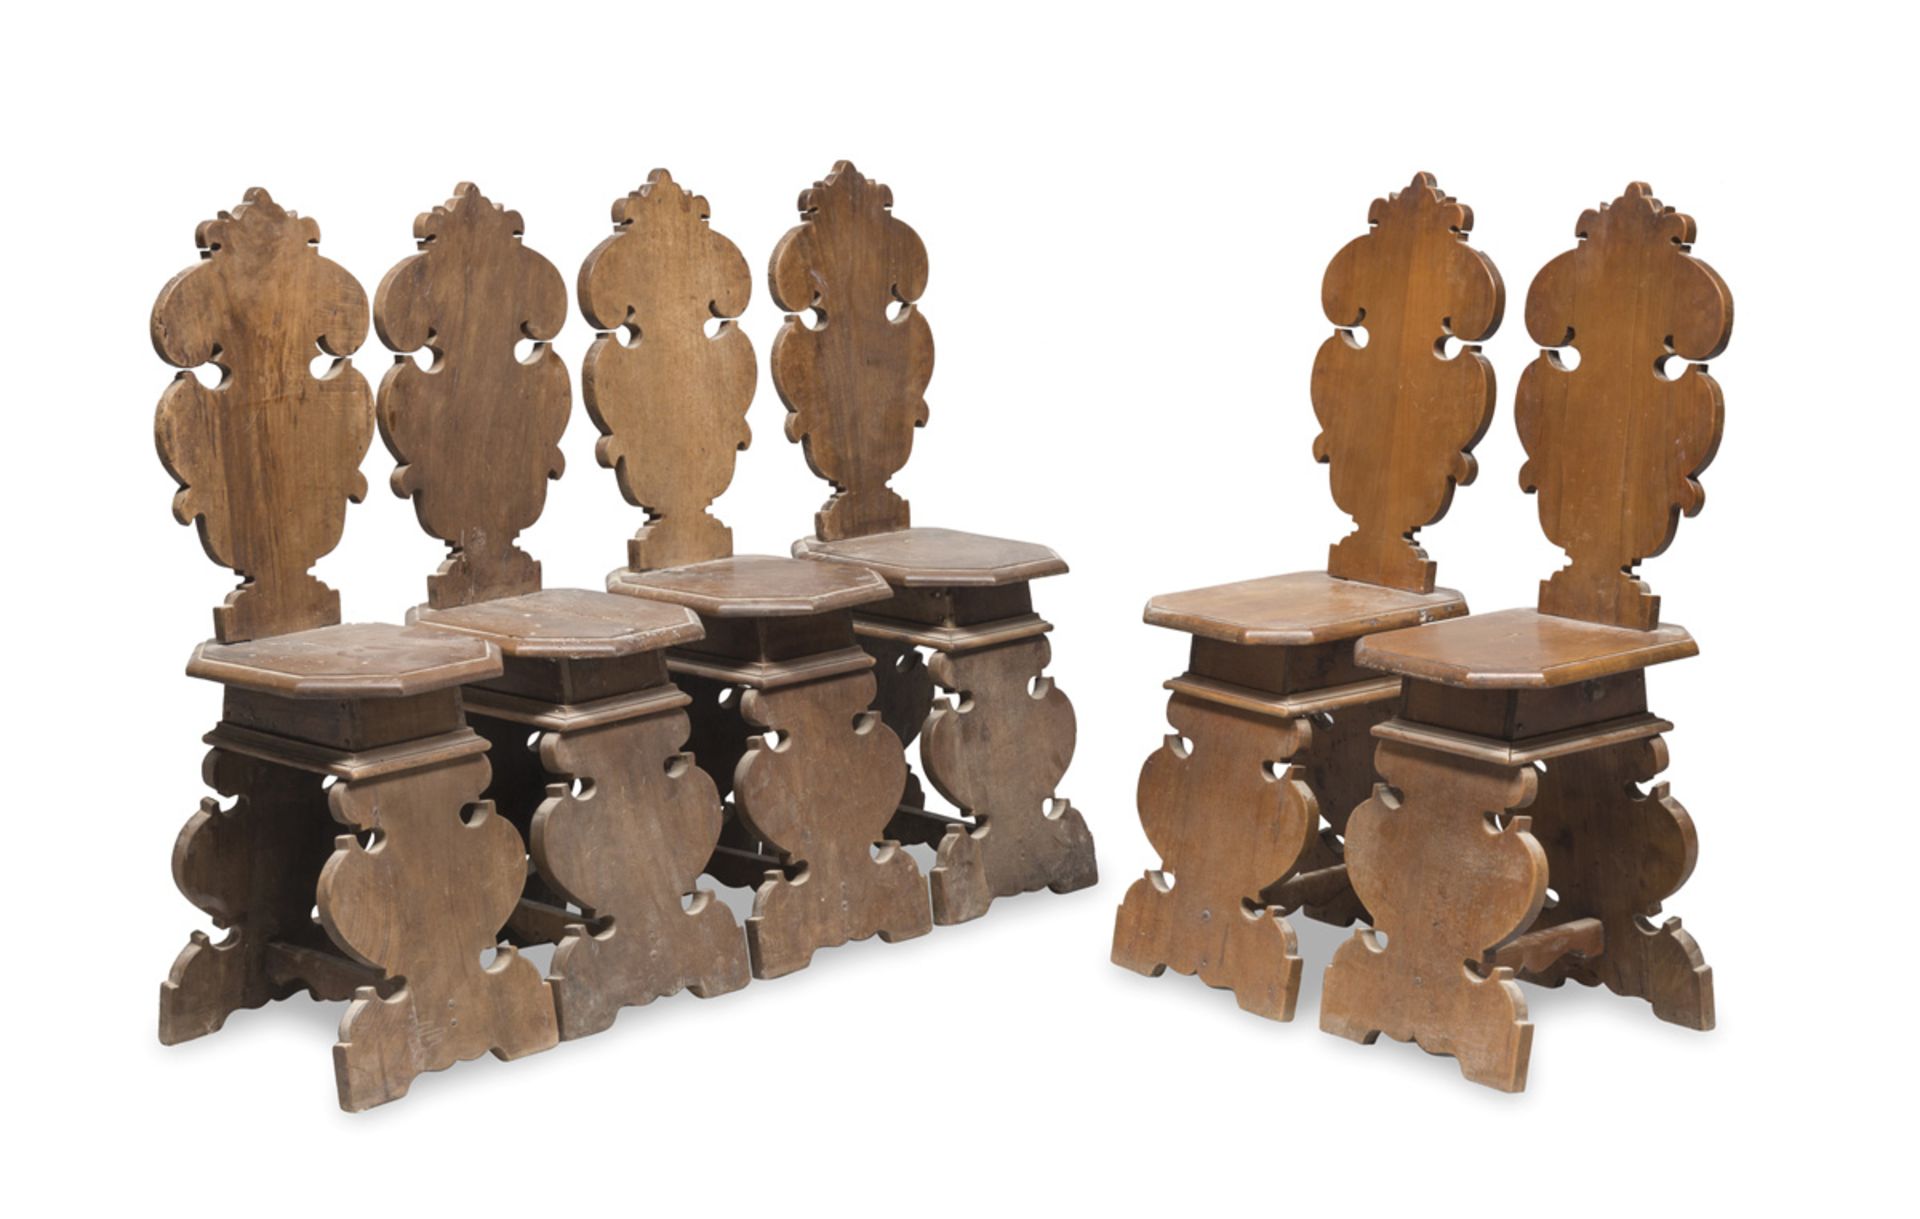 SIX WALNUT CHAIRS, LATE 19TH CENTURY with sculpted and flat legs of same carving. Polygonal seats.